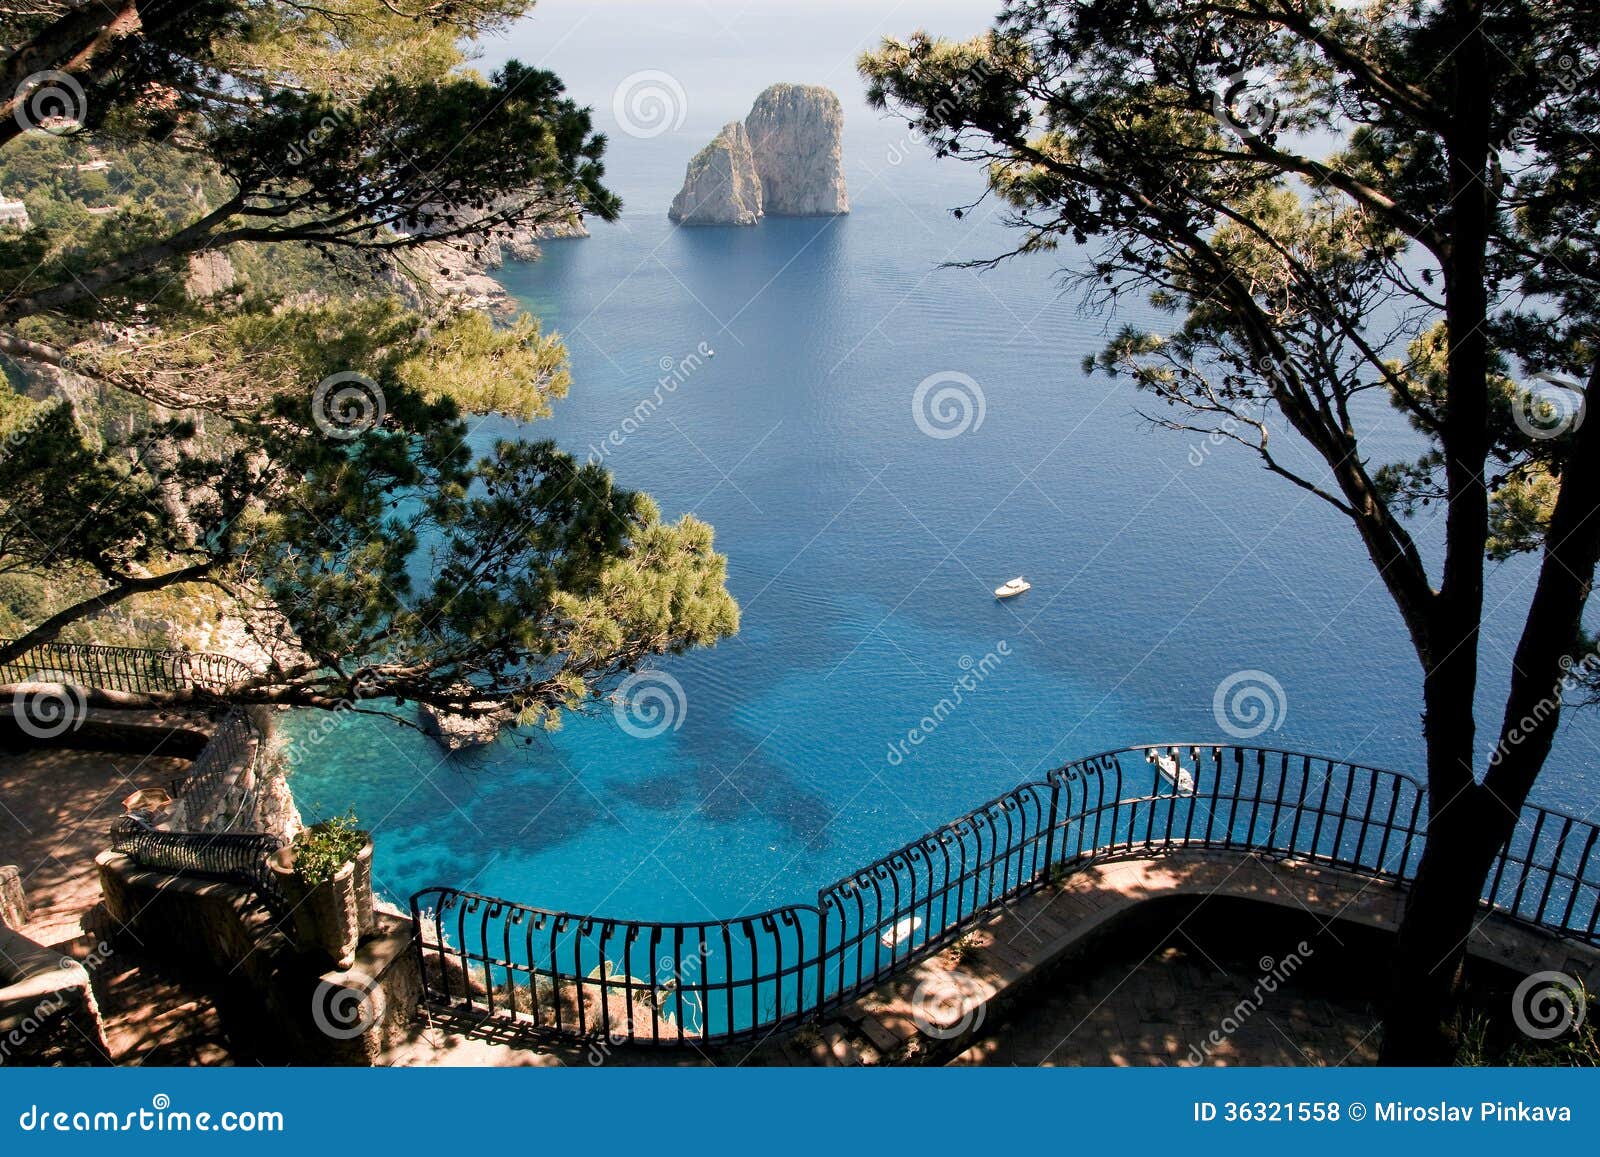 view from the cliff on the island of capri, italy stock